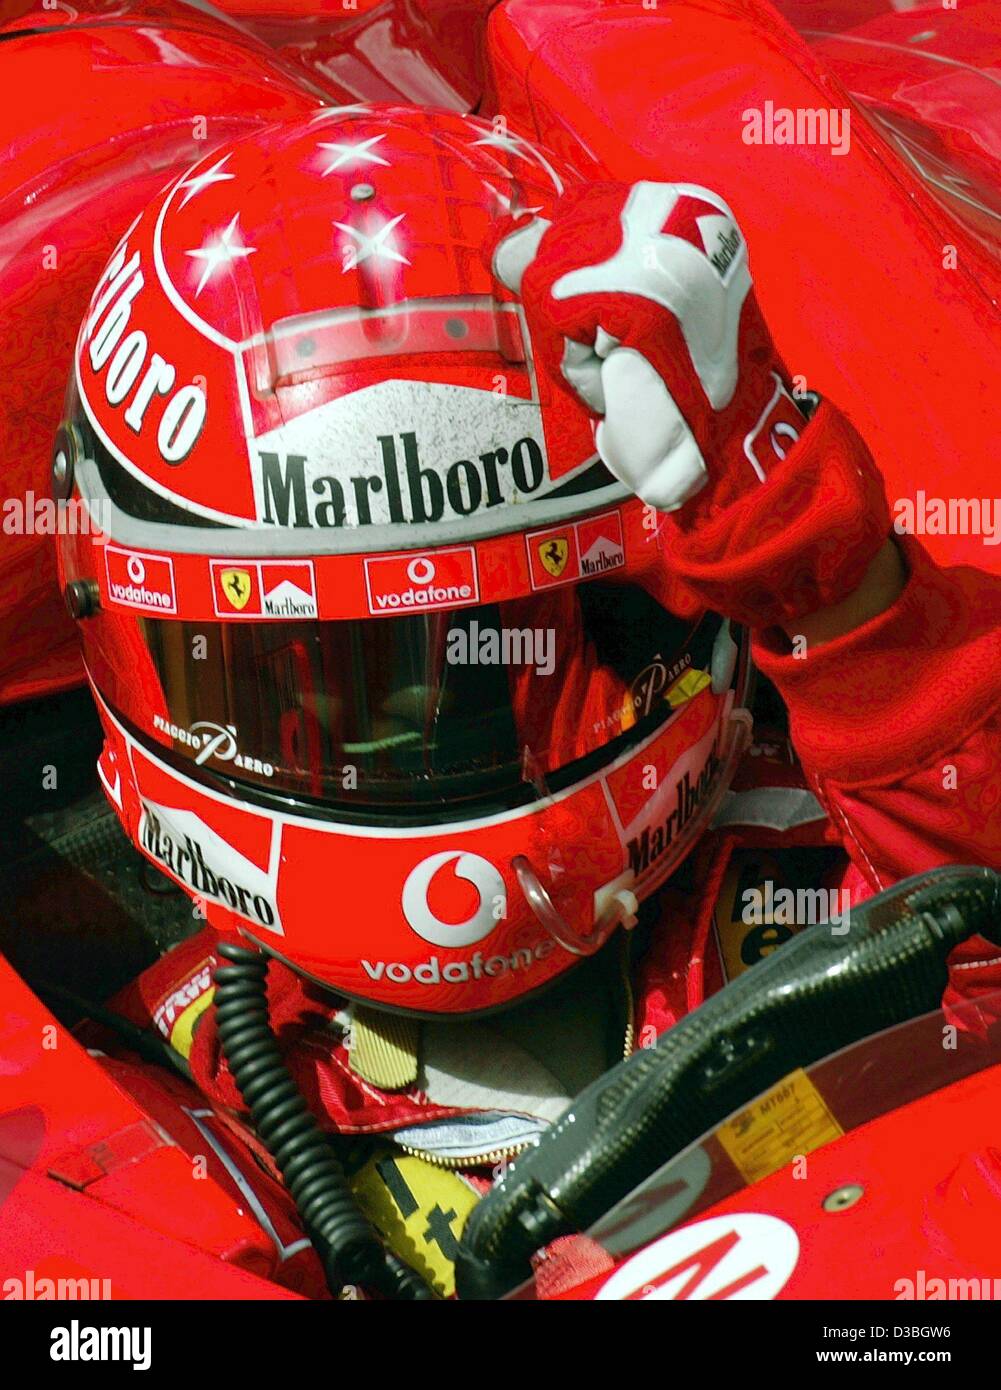 dpa) - German formula one world champion Michael Schumacher (Ferrari)  knocks his hand at his helmet as a gesture indicating that he cheers after  winning the Canadian Grand Prix on the Circuit